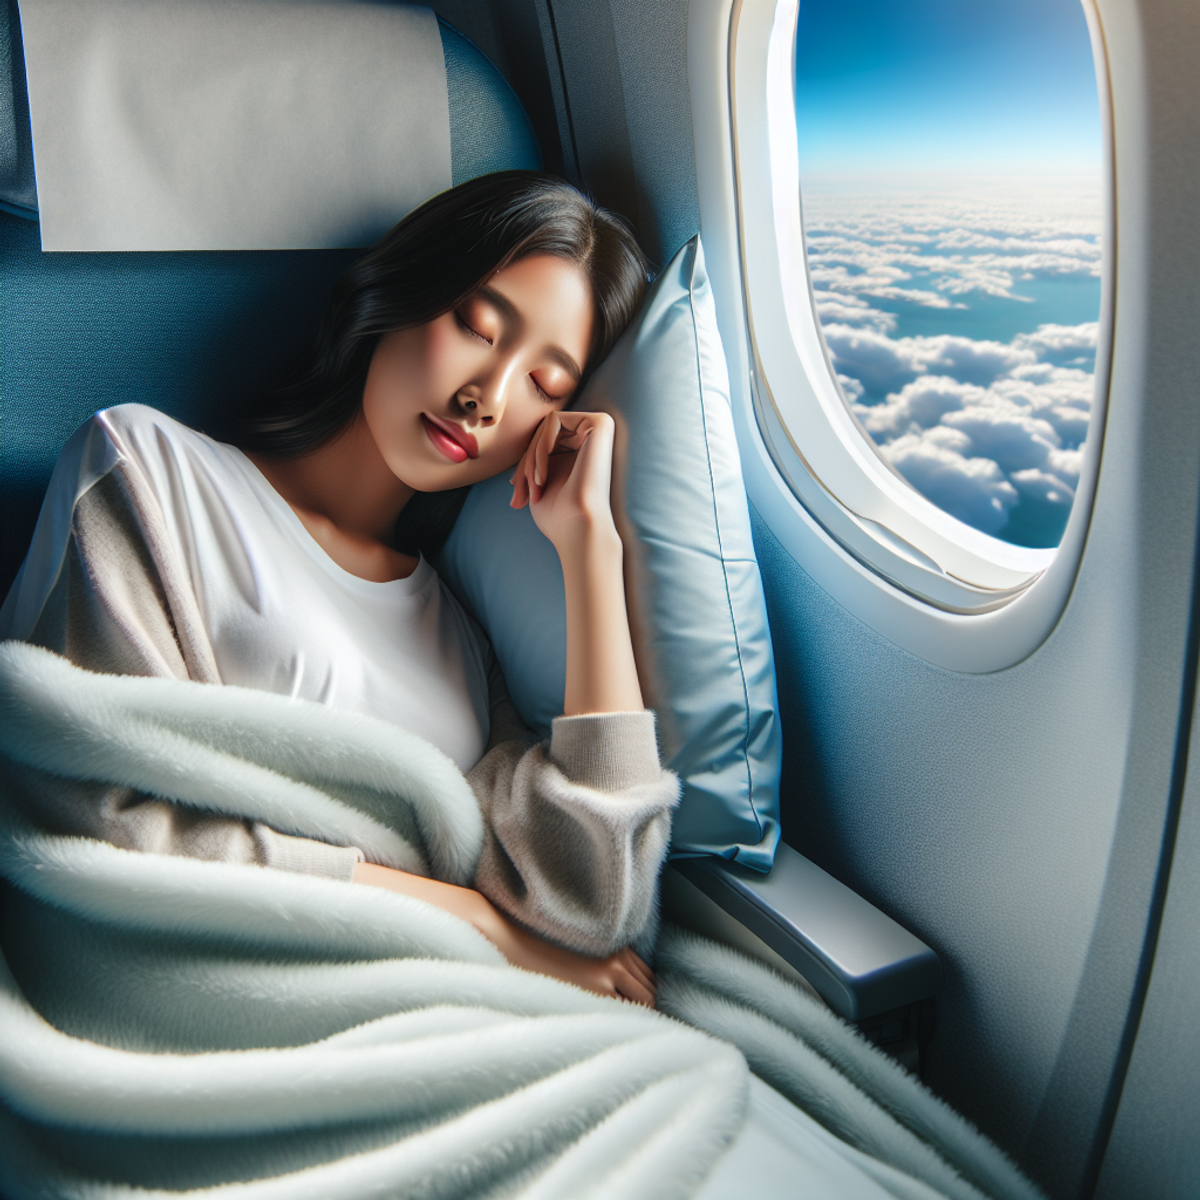 Alt text: A South Asian woman sleeping peacefully in an airplane seat, covered with a blanket and wearing an eye mask, with a serene blue sky and fluffy white clouds in the background.